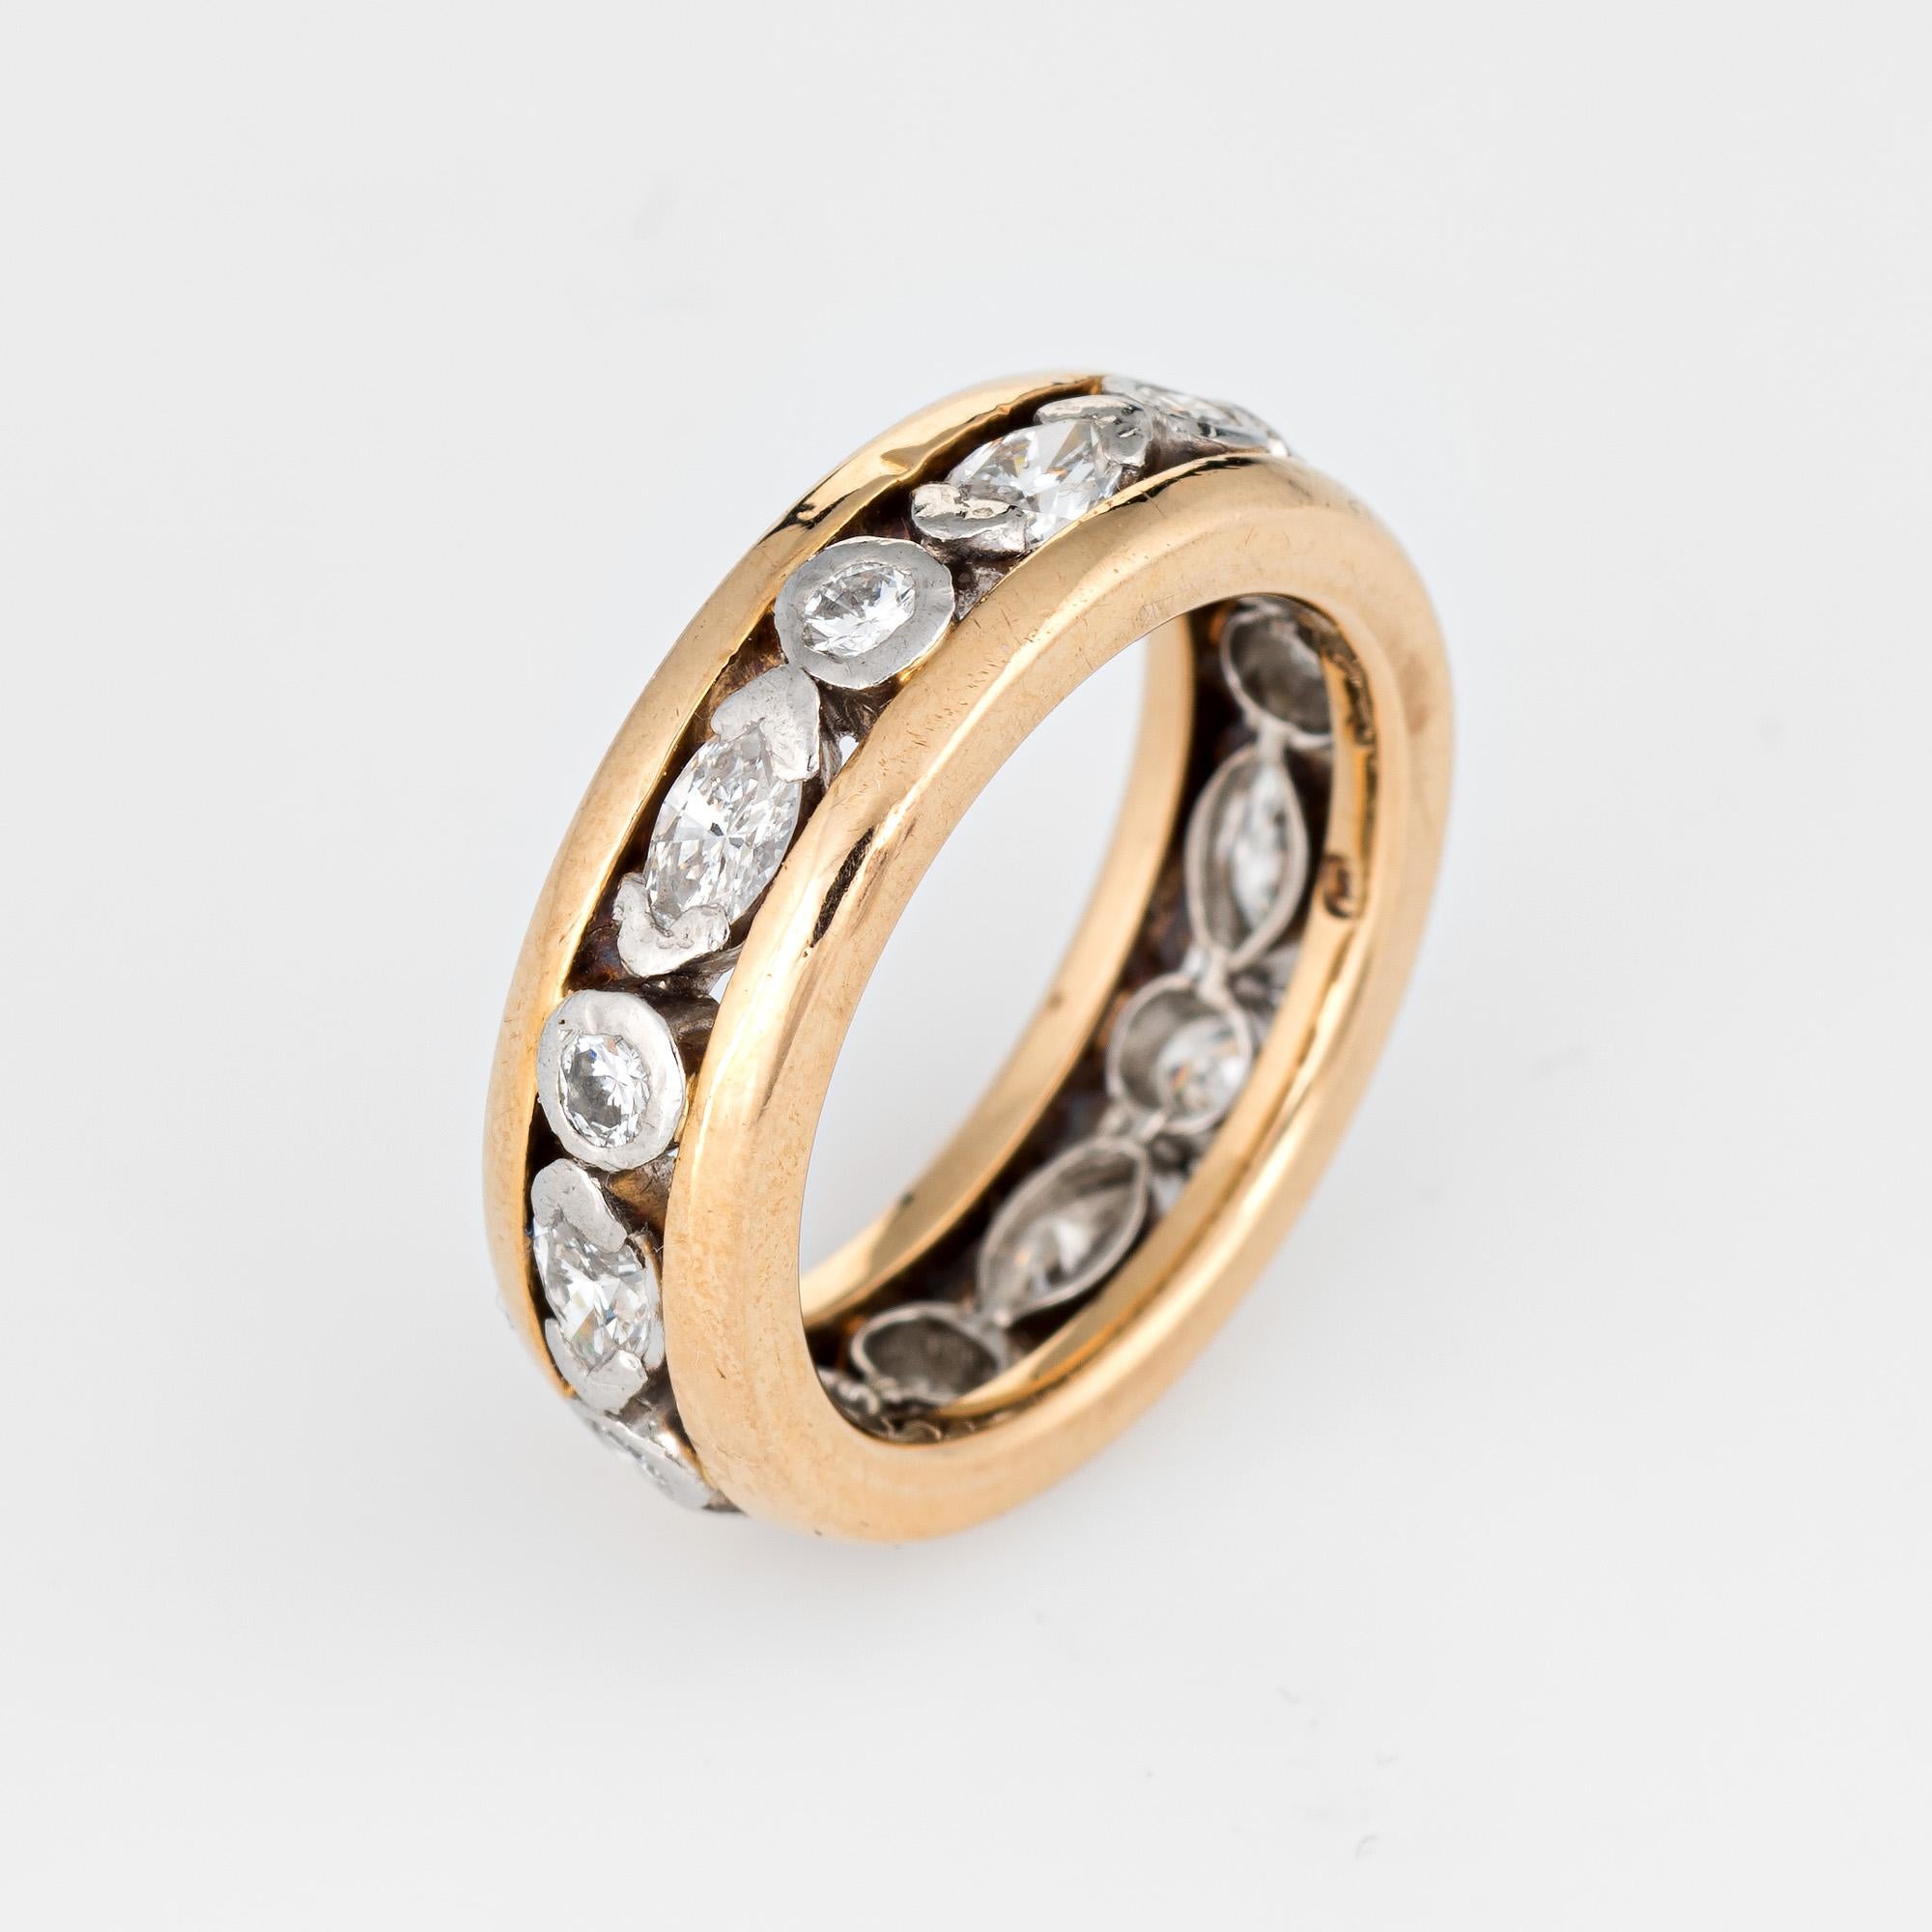 Stylish vintage Oscar Heyman diamond eternity ring crafted in 18 karat yellow gold and platinum. 

The classic band features an alternating pattern of marquise & round cut diamonds set in platinum bordered with the 18k yellow gold outer band. The